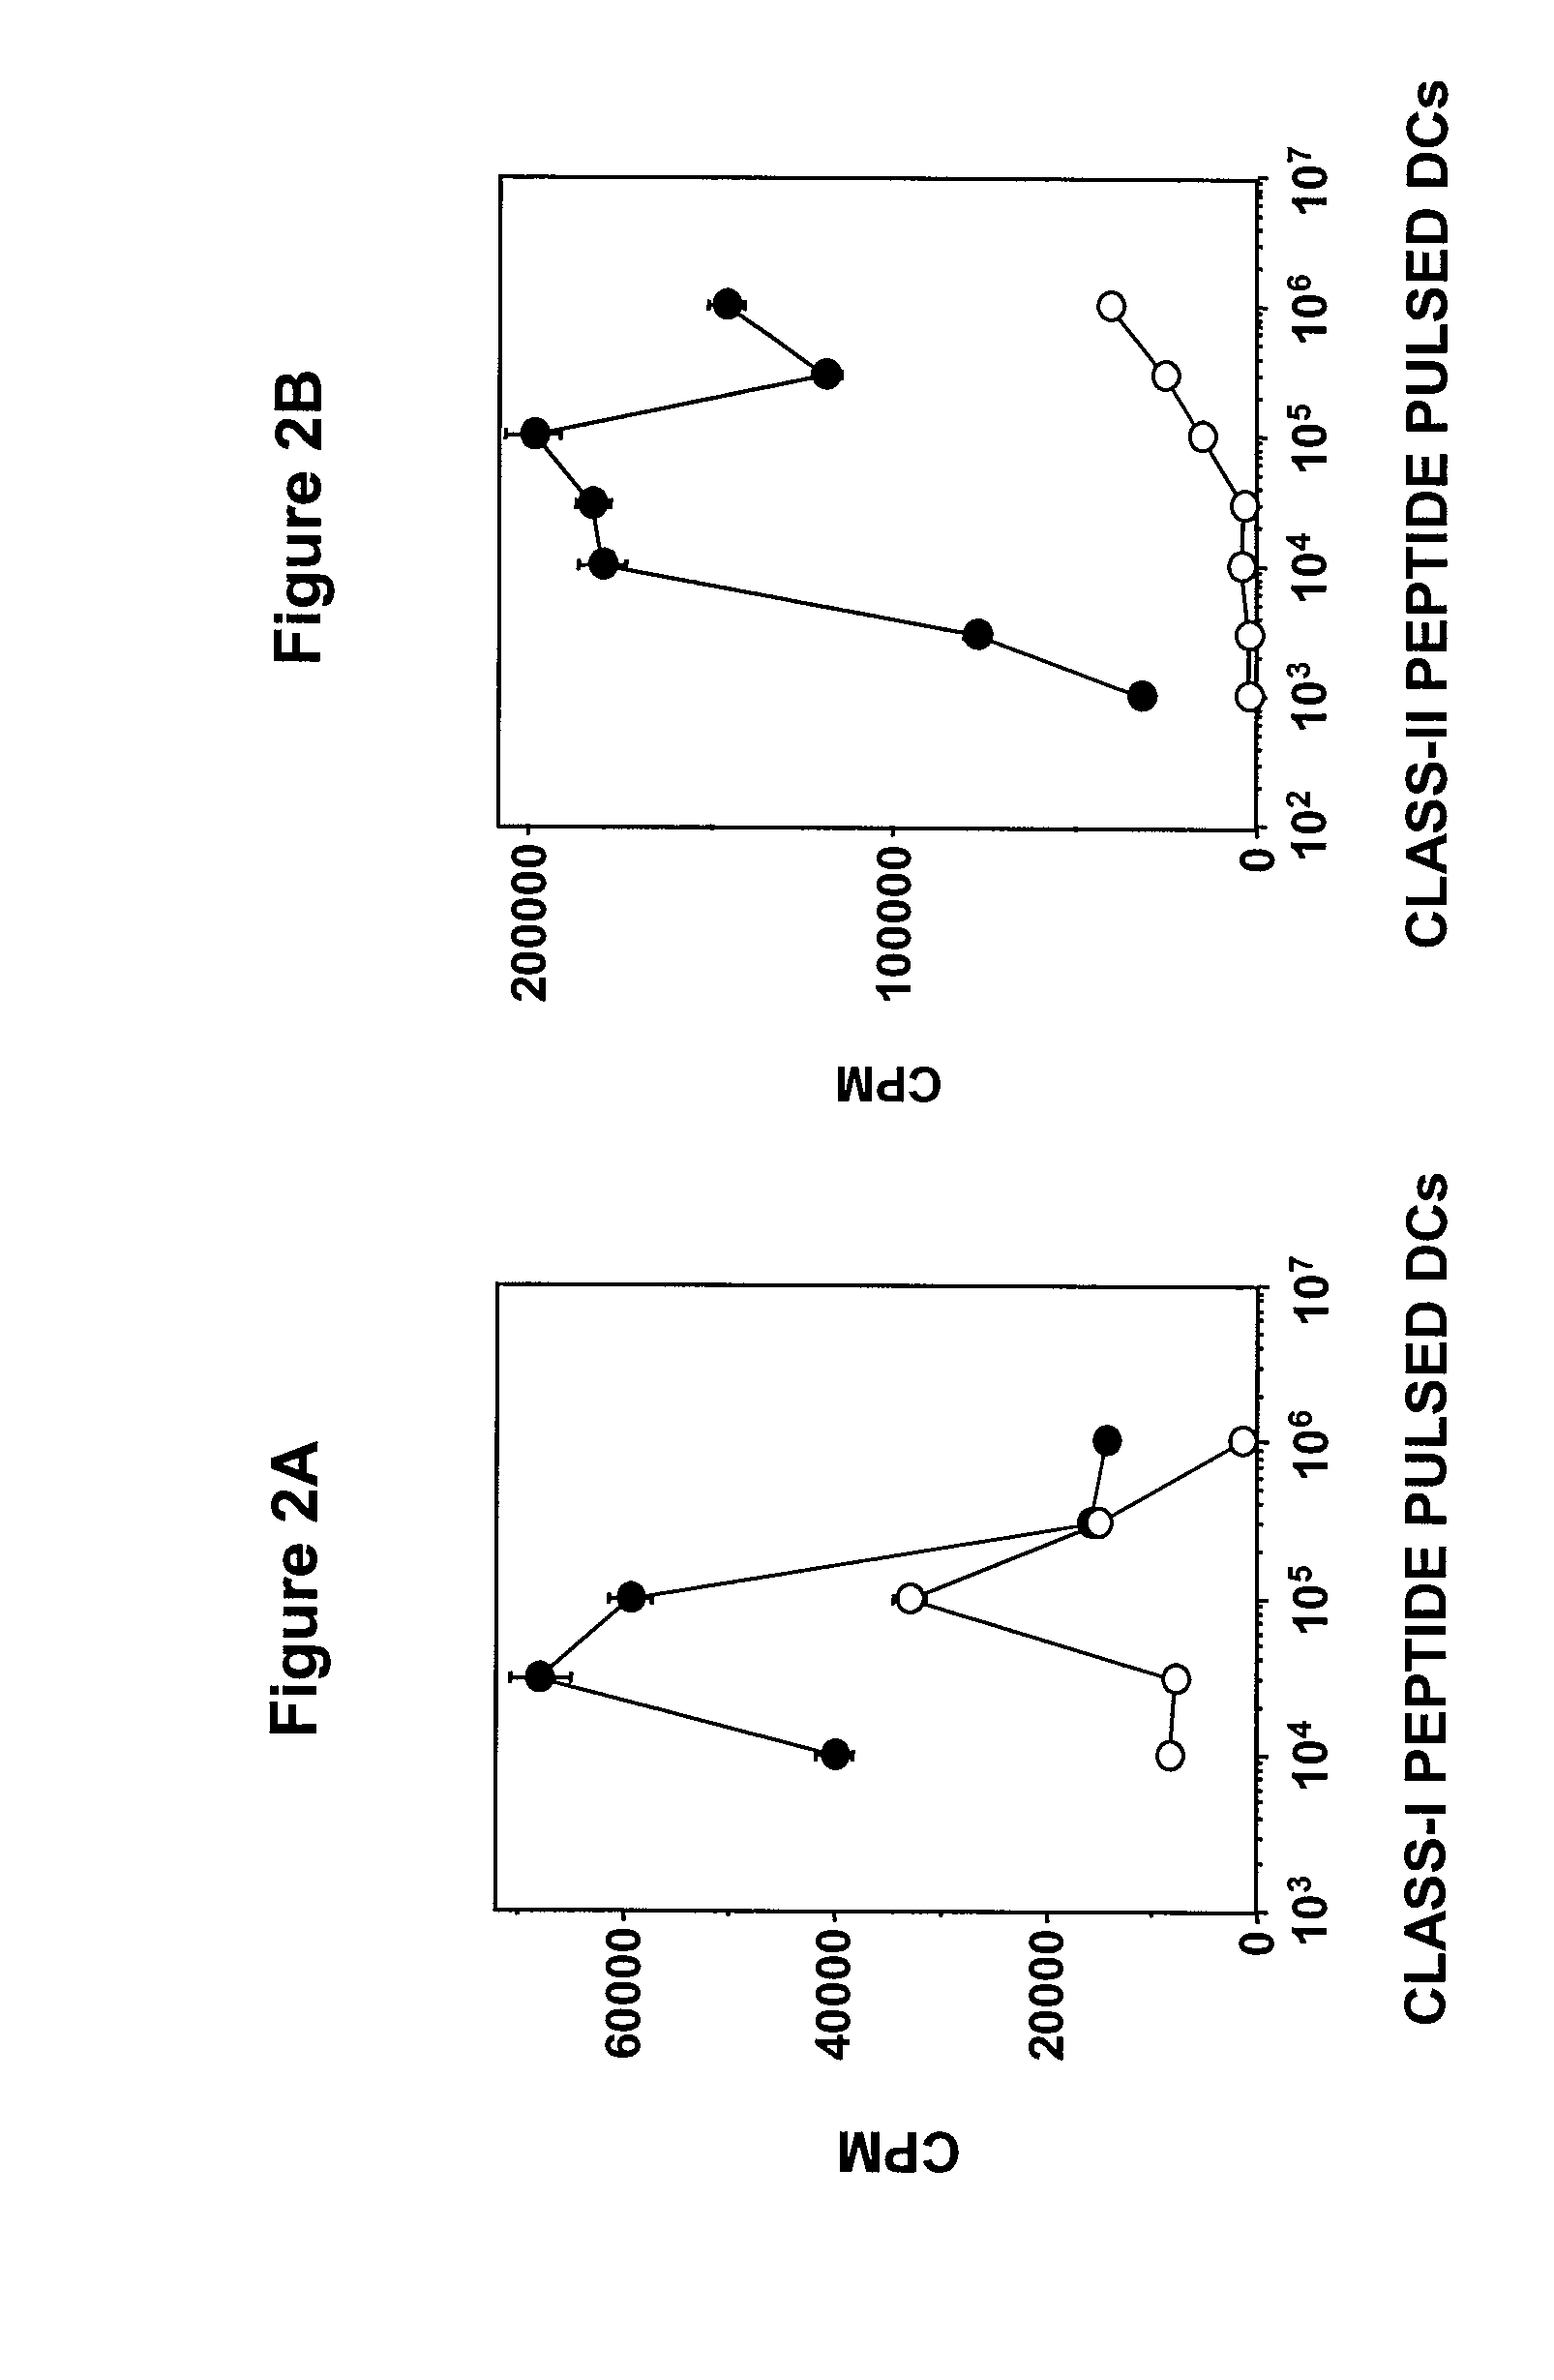 Methods and molecules for modulating an immune response